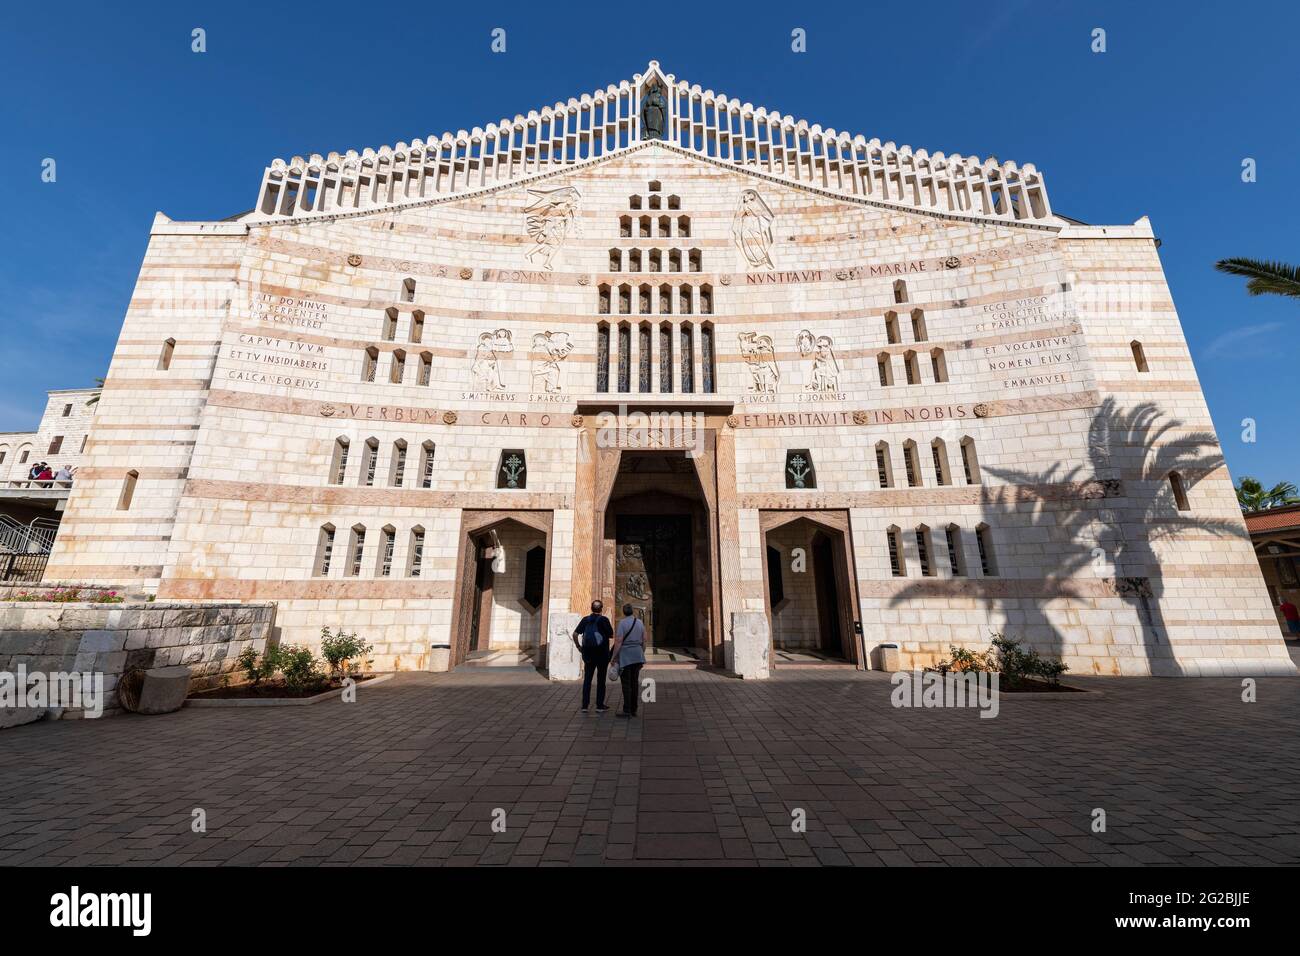 Western facade of the Church of the Annunciation  also referred to as the Basilica of the Annunciation, is a Catholic Church in Nazareth. Israel Stock Photo